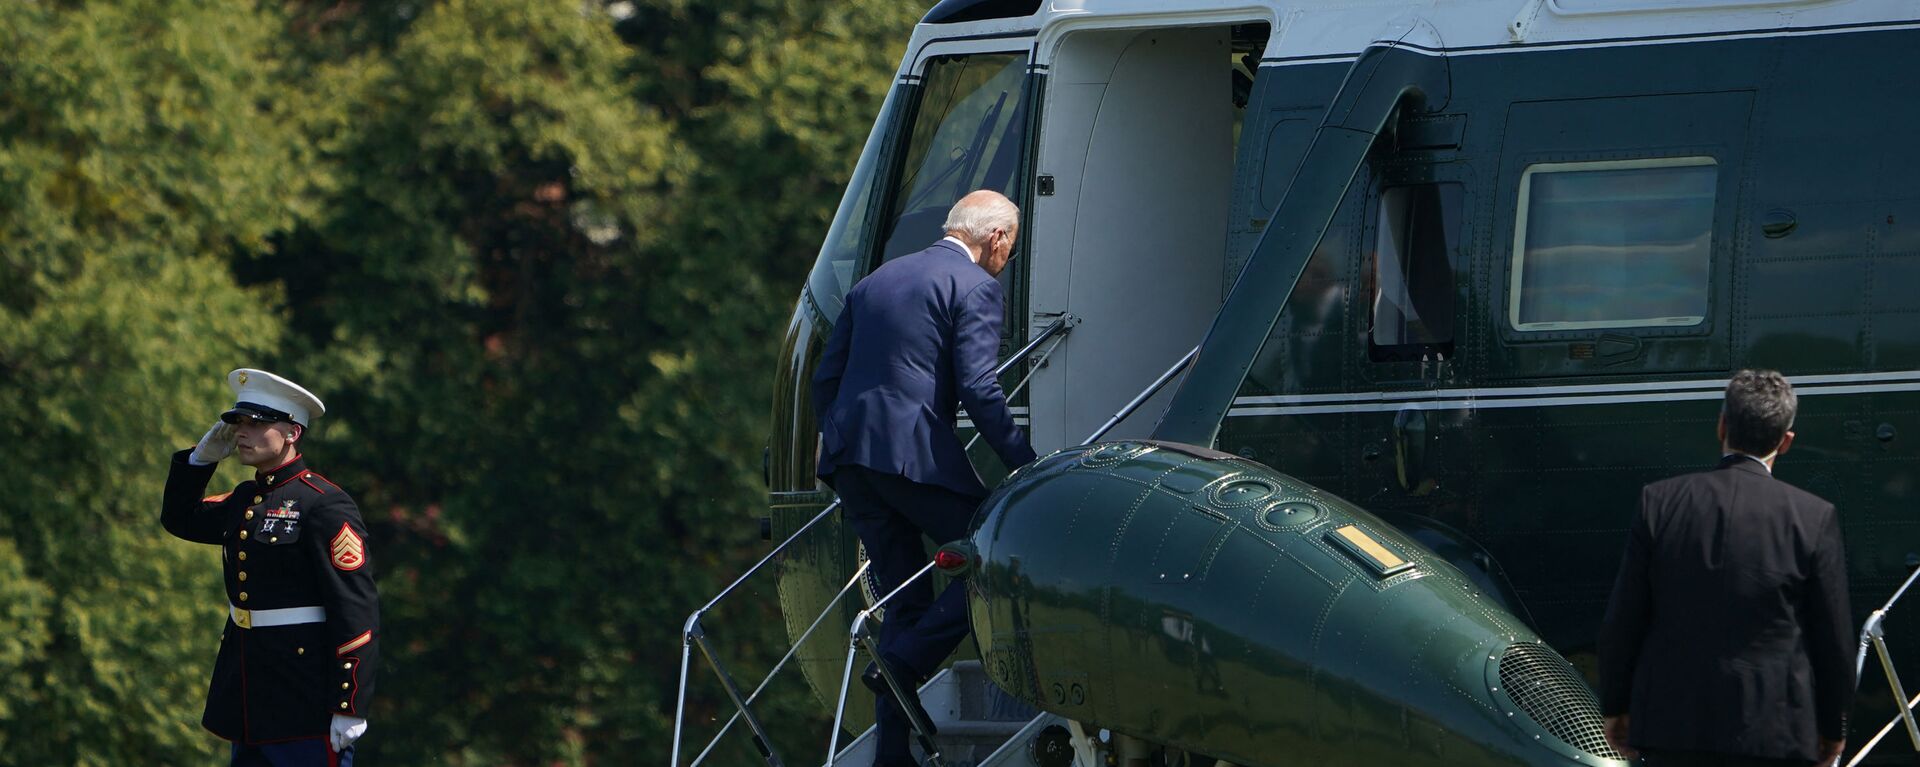 US President Joe Biden makes his way to board Marine One before departing from Fort McNair in Washington, DC on August 12, 2021. - Biden is heading to his residence in Wilmington, Delaware. - Sputnik International, 1920, 14.08.2021